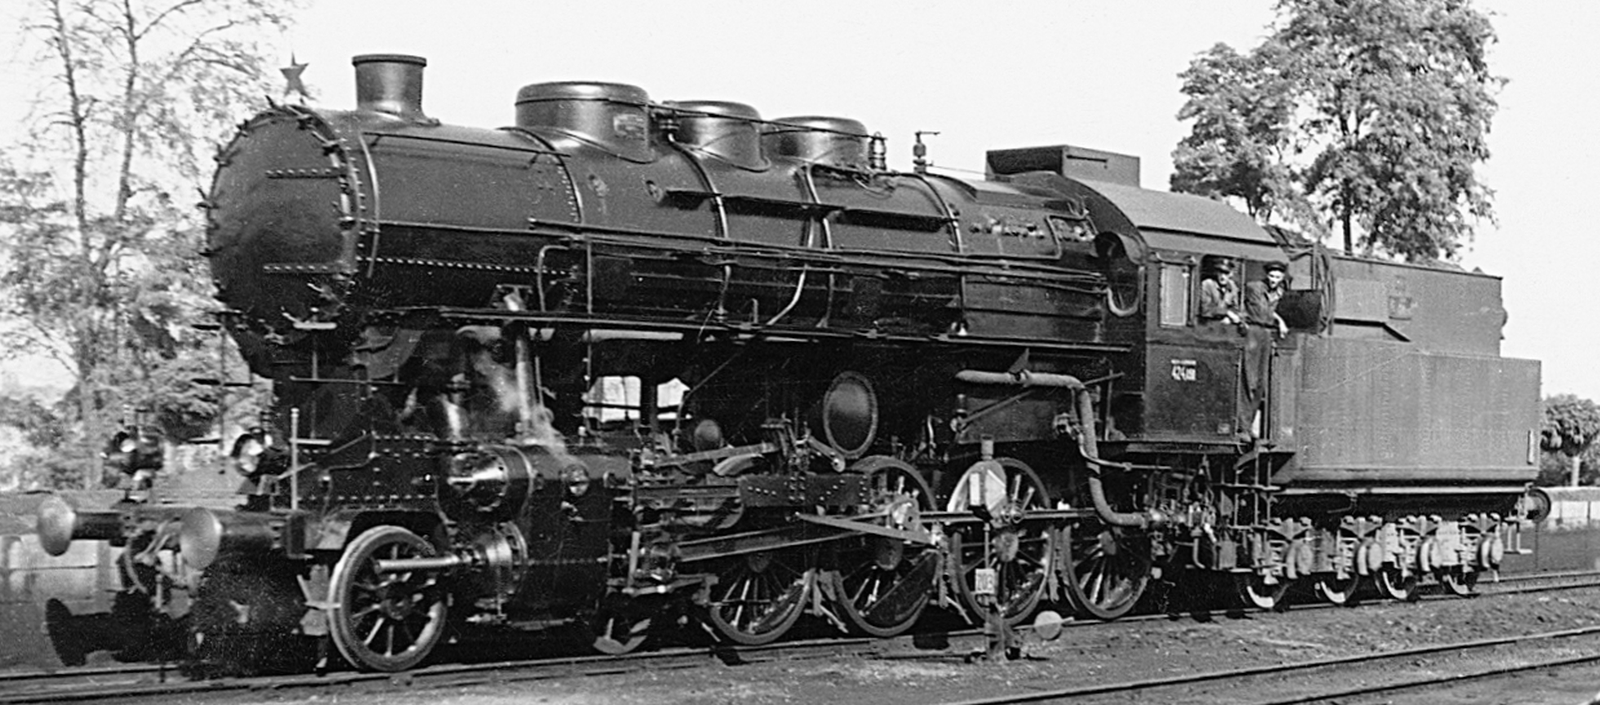 The winner of the 1952 "Locomotive Cleanliness Competition".